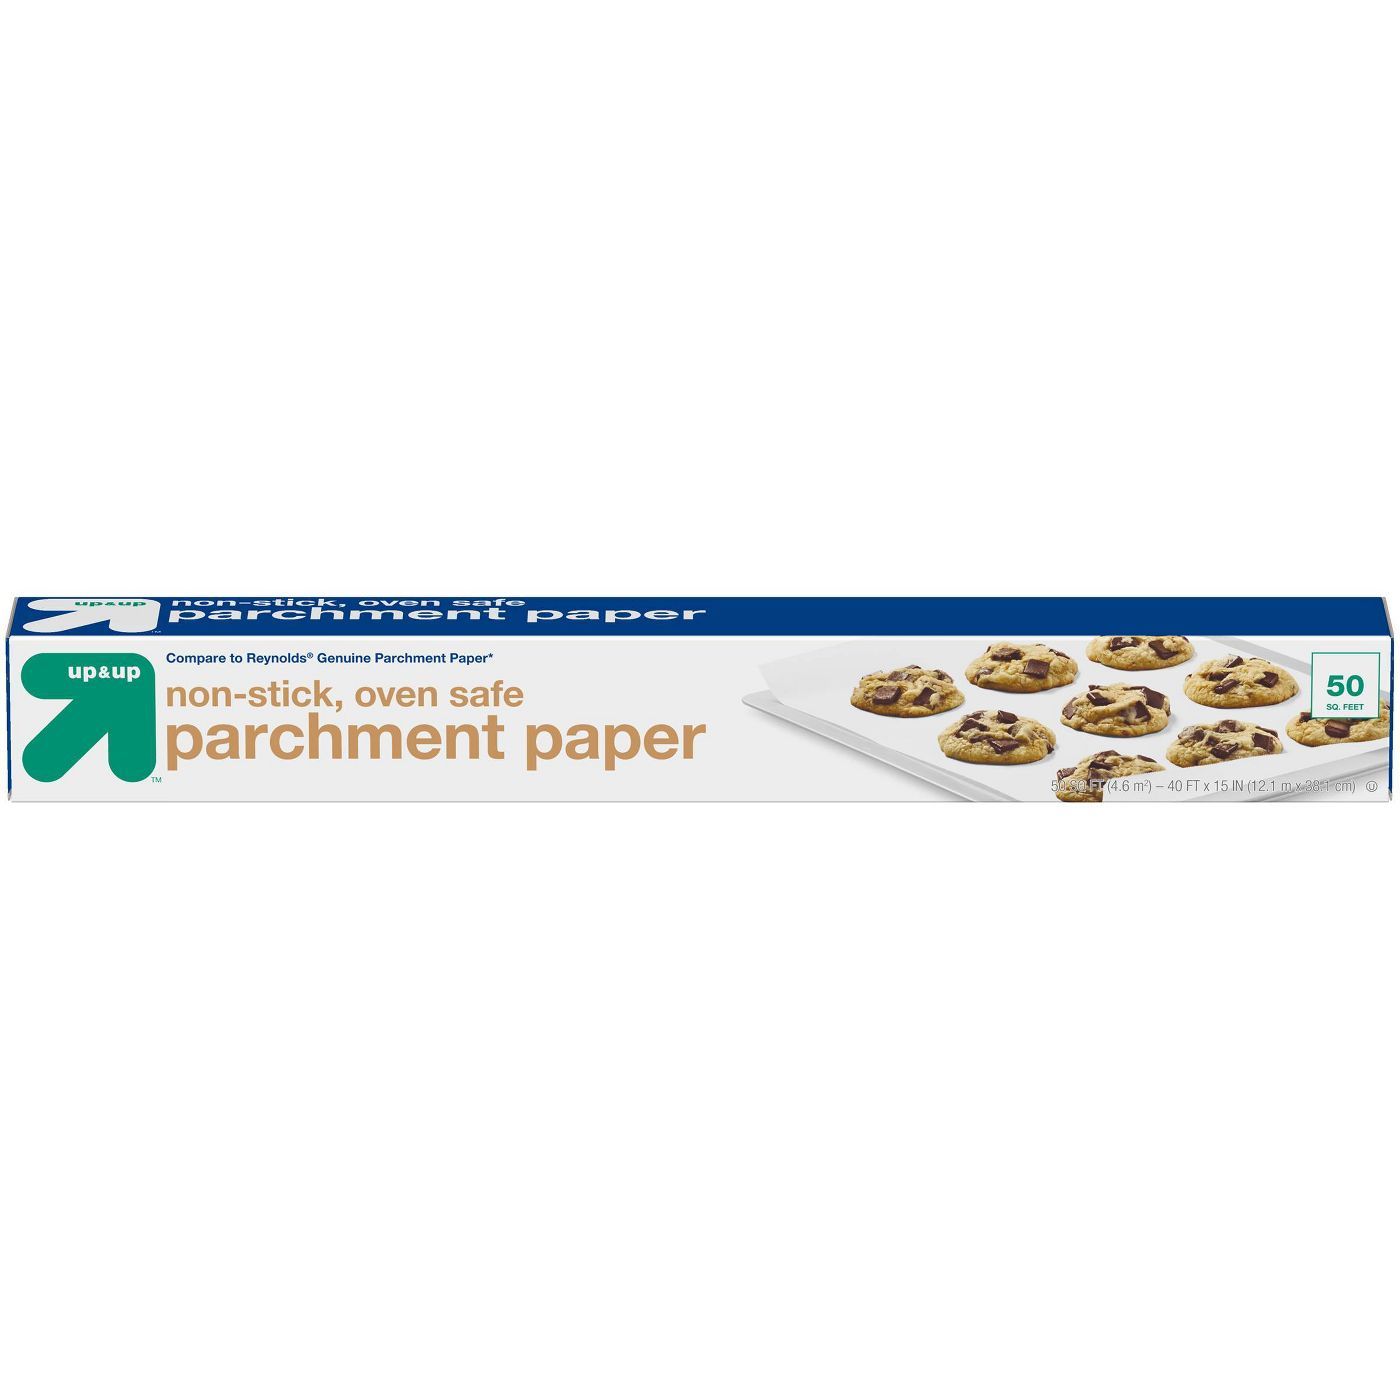 Unbleached Parchment Paper Roll for Baking, 13 in x 164 Ft, 177 Sq.Ft,  Baklicious Non-stick Baking Parchment Paper for Baking, Cookies, Bread,  Oven